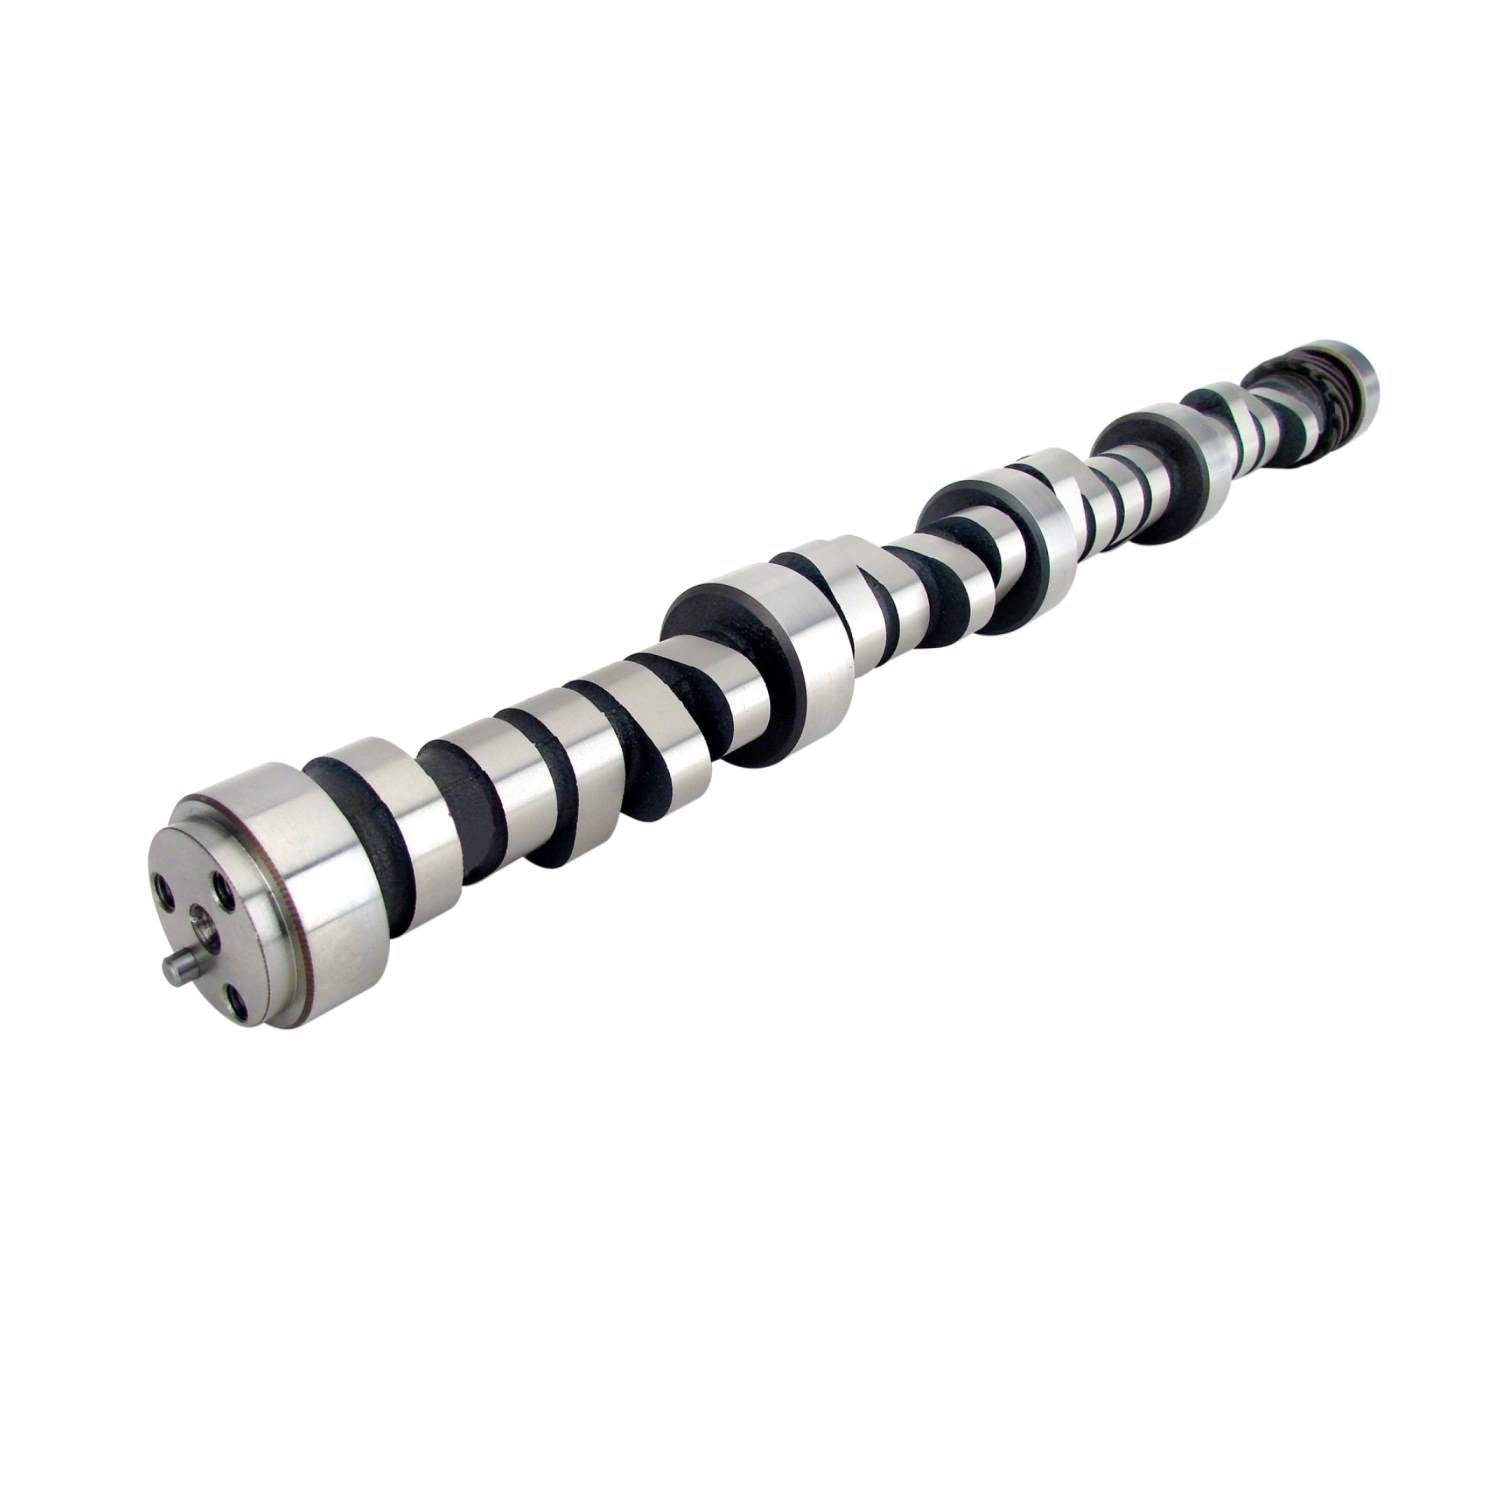 Competition Cams Super Street Drag Race Camshaft 01-712-9